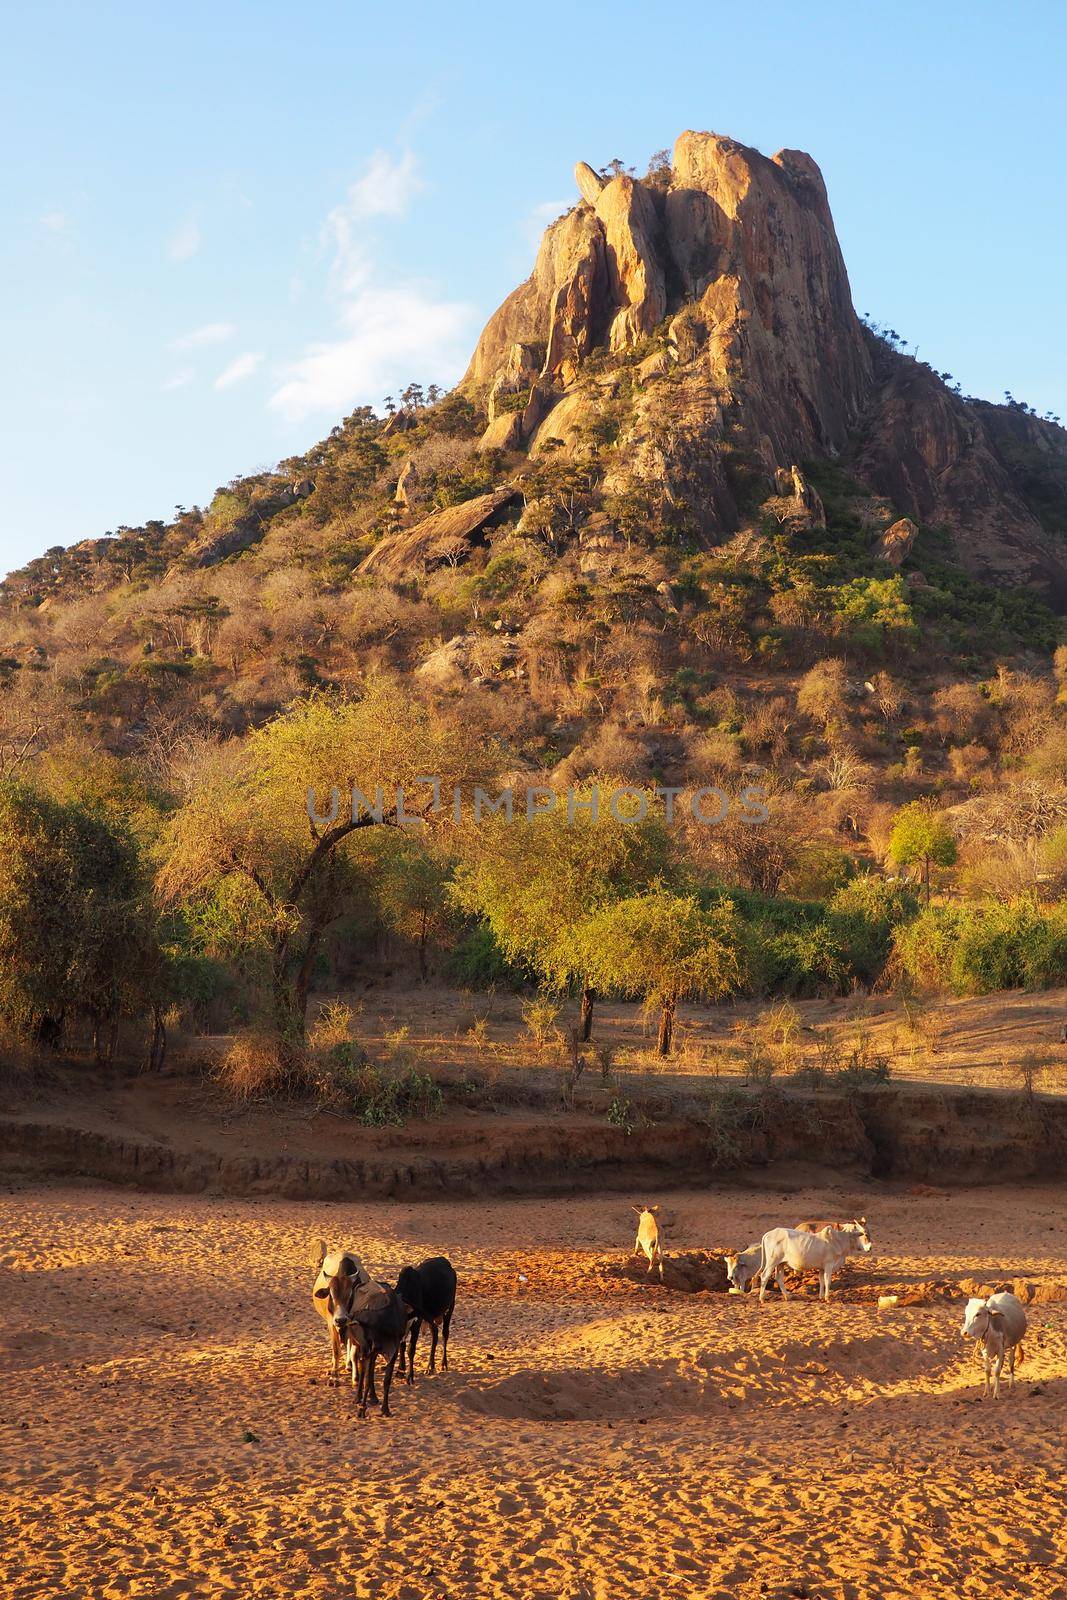 Cows drinking from a dry river bed in African landscape by fivepointsix